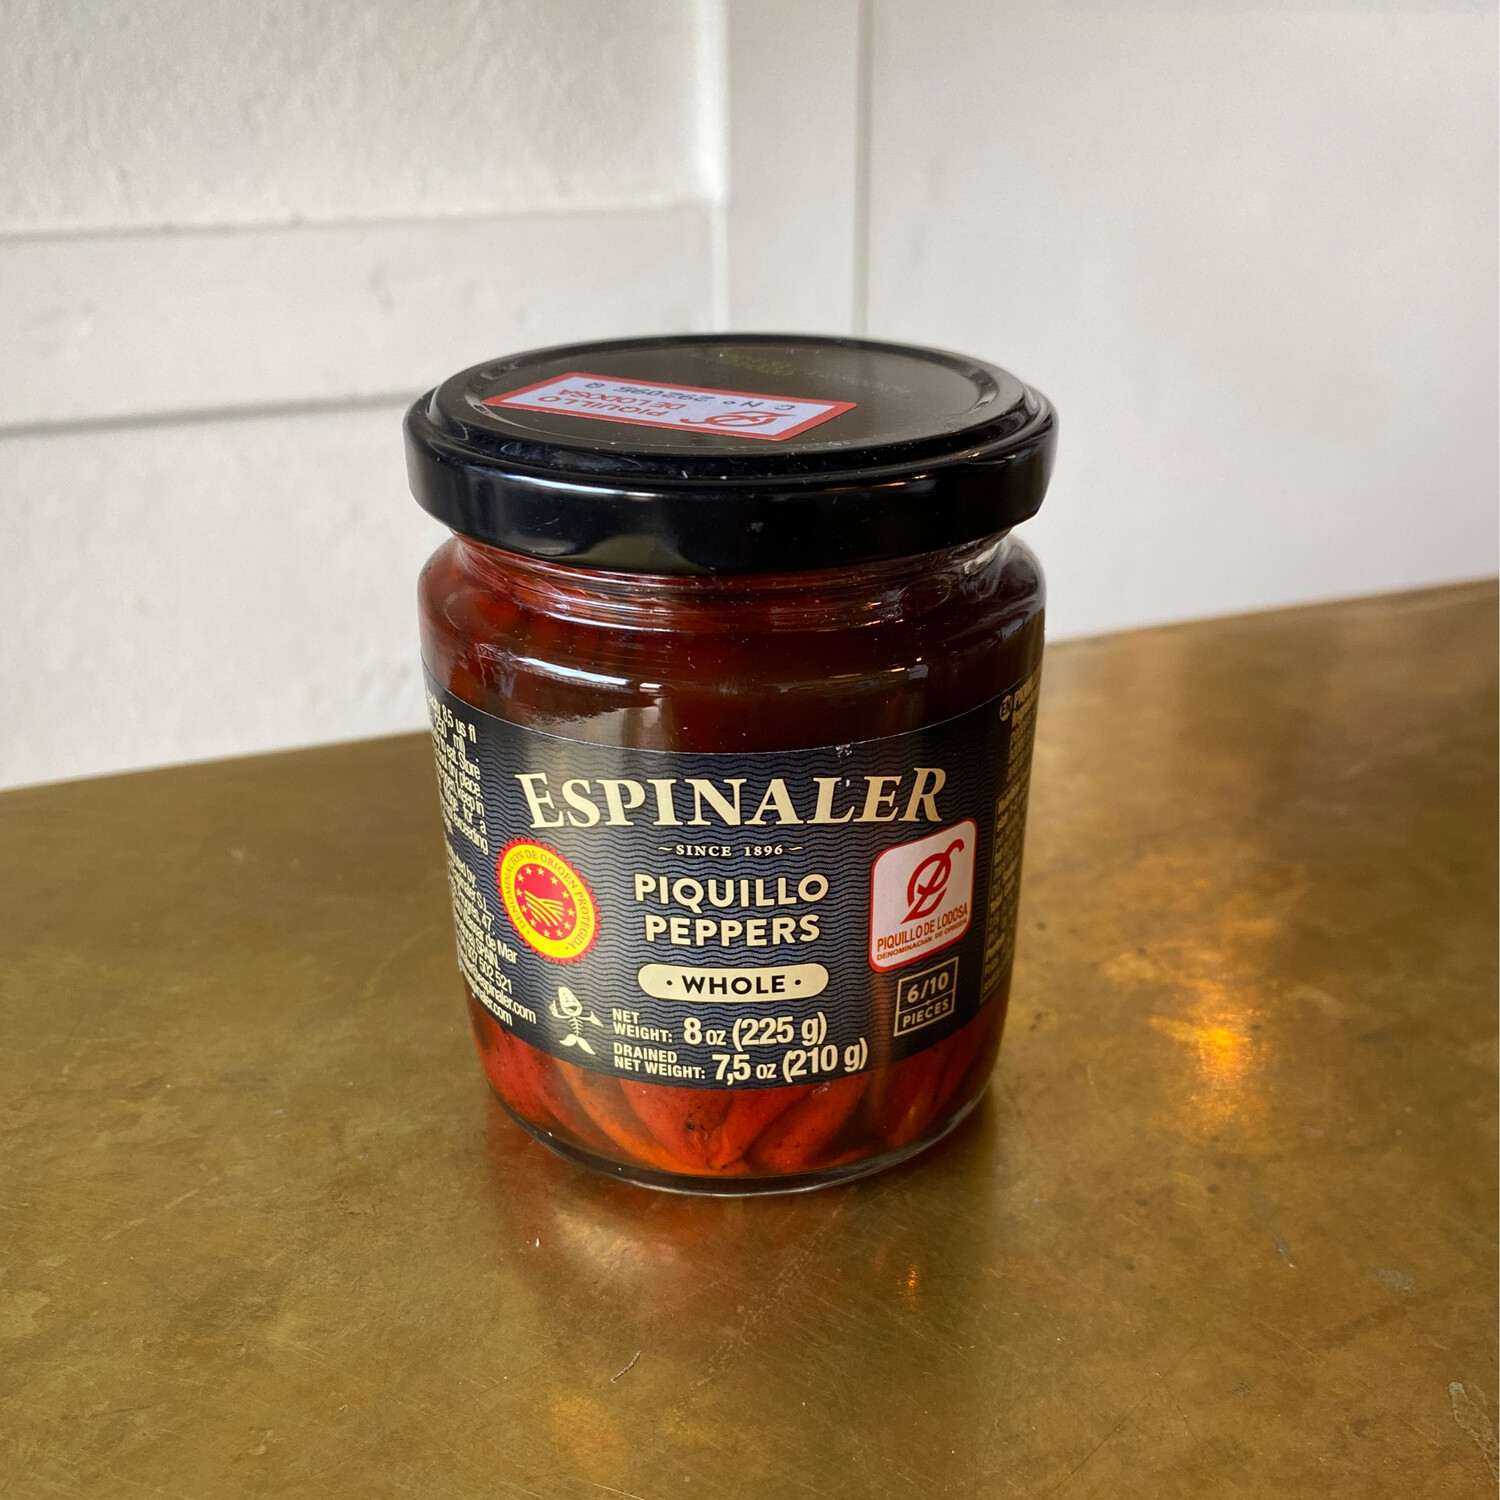 Espinaler Whole Piquillo Peppers